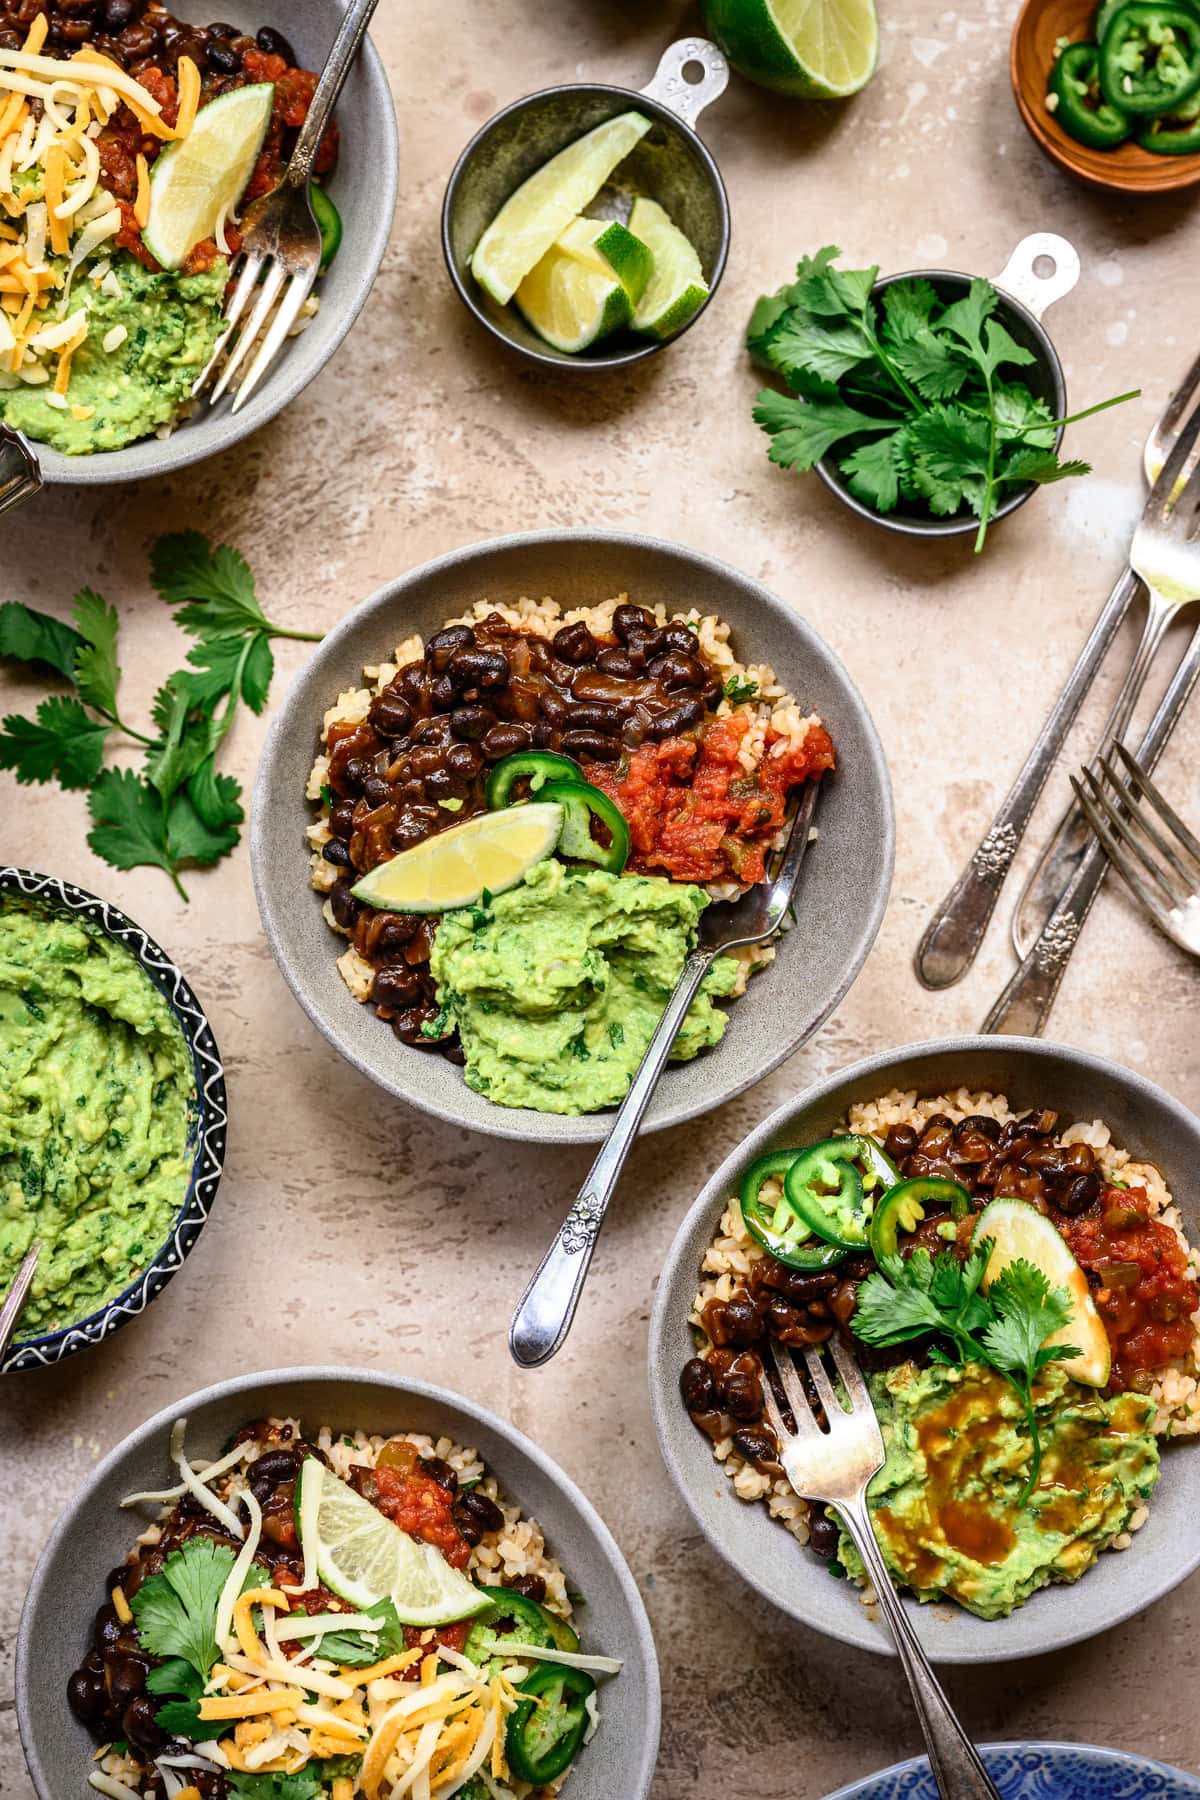 Overhead view of vegan burrito bowls with spicy black beans and guacamole in grey bowls on rustic background